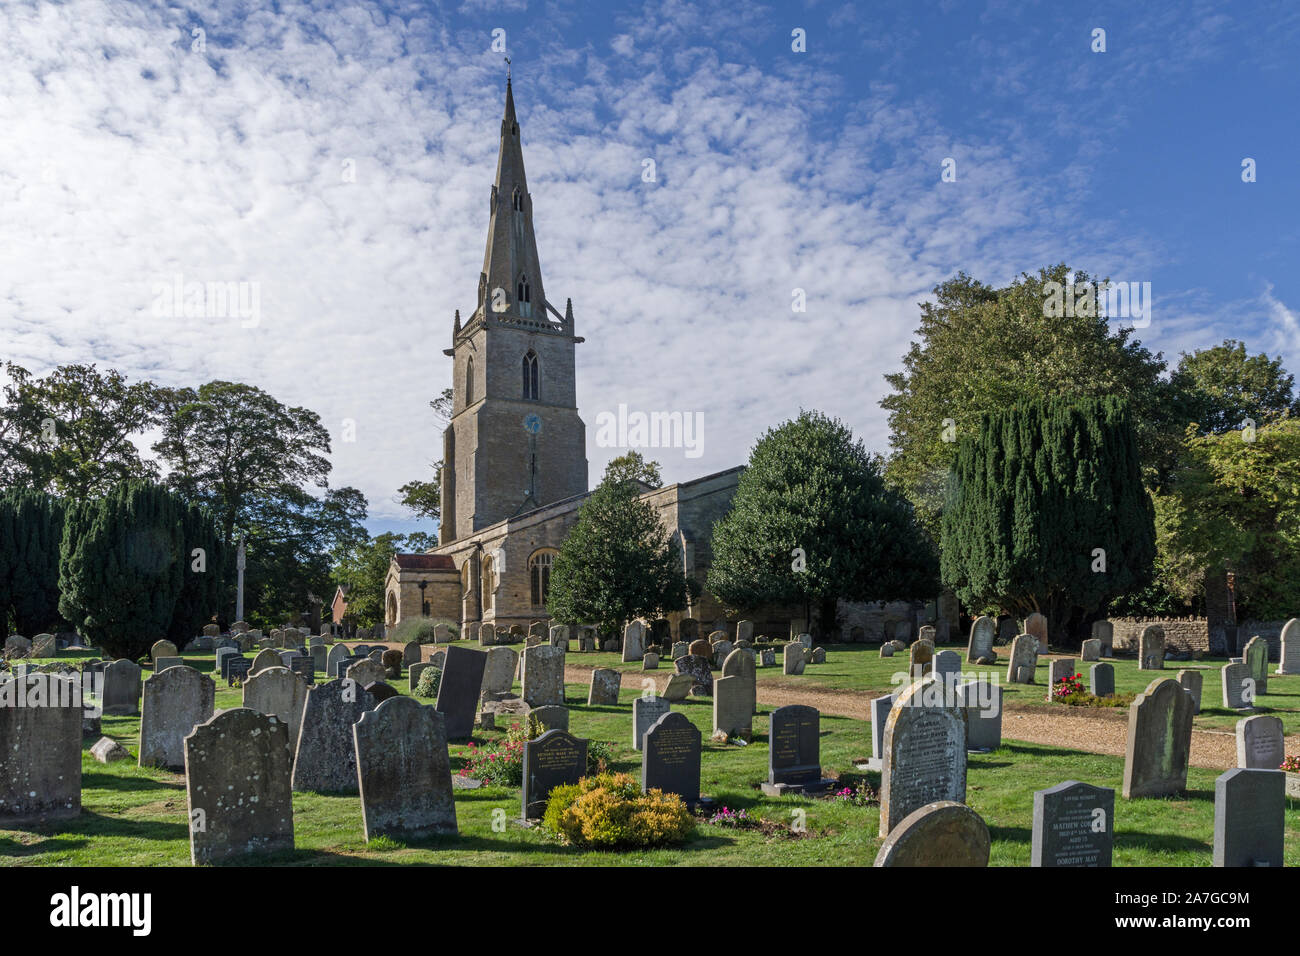 The parish church of St Peter in the village of Sharnbrook, Bedfordshire, UK; earliest parts date from 13th century with a 15th century spire. Stock Photo